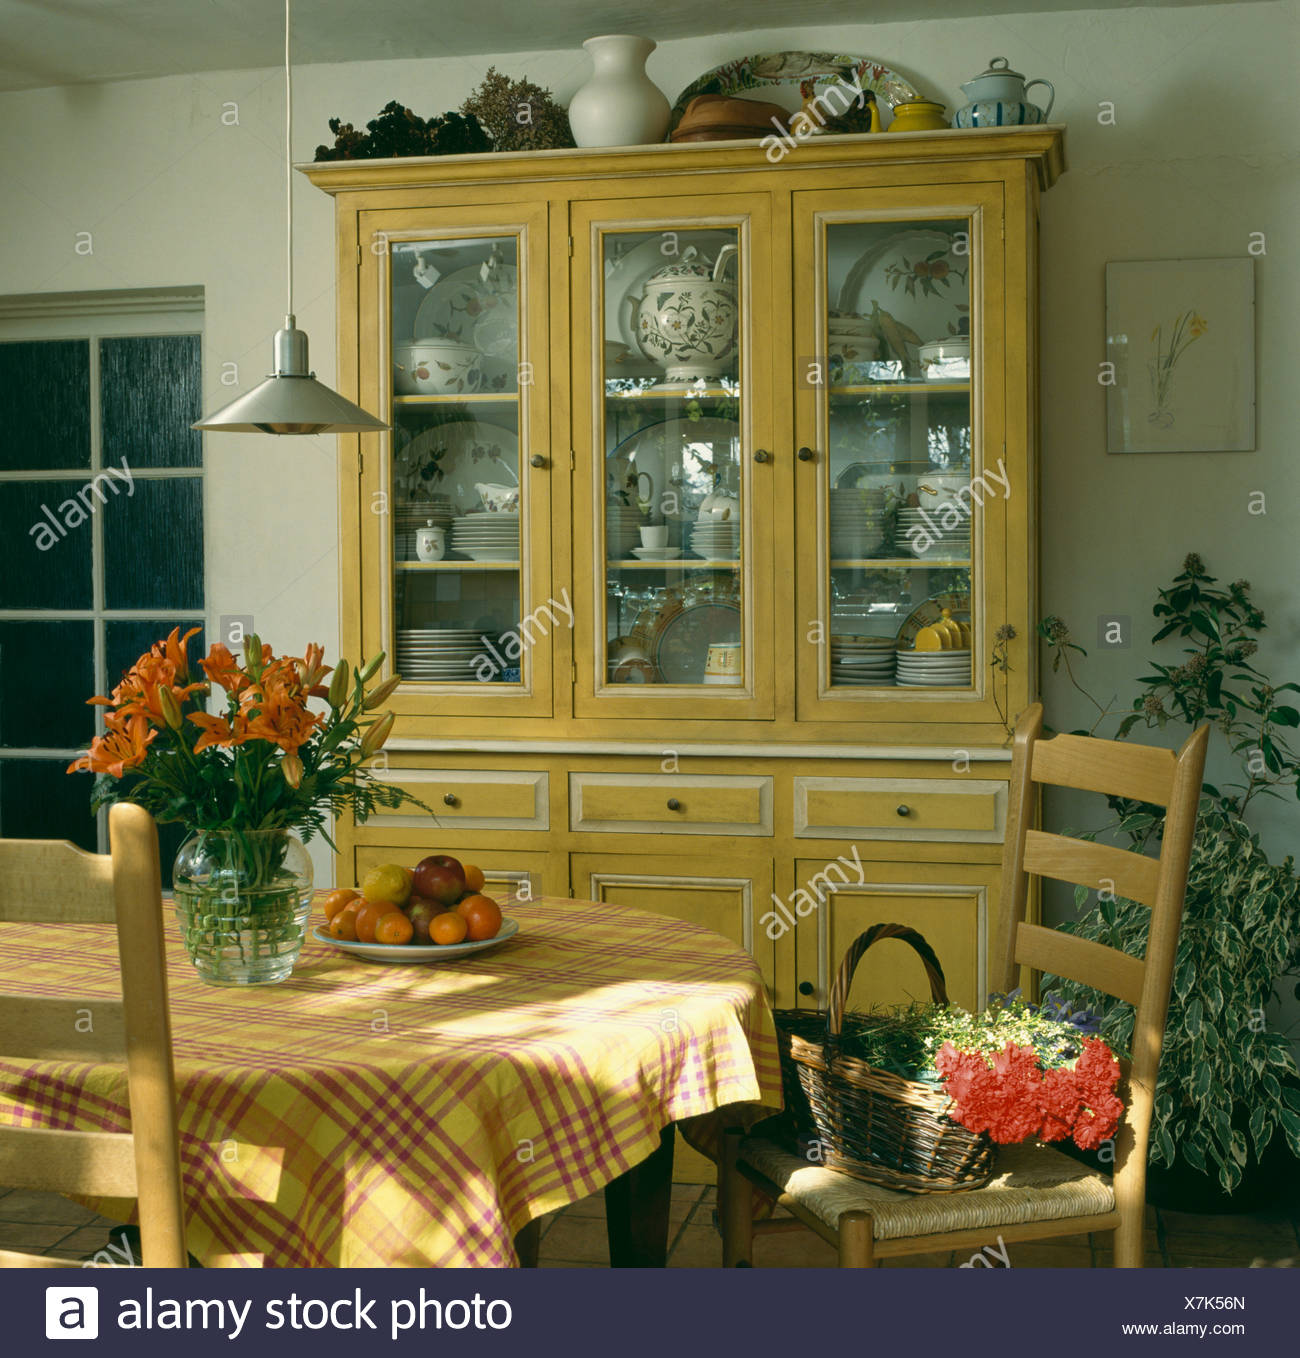 Painted Yellow Dresser With Glass Doors In Dining Room With